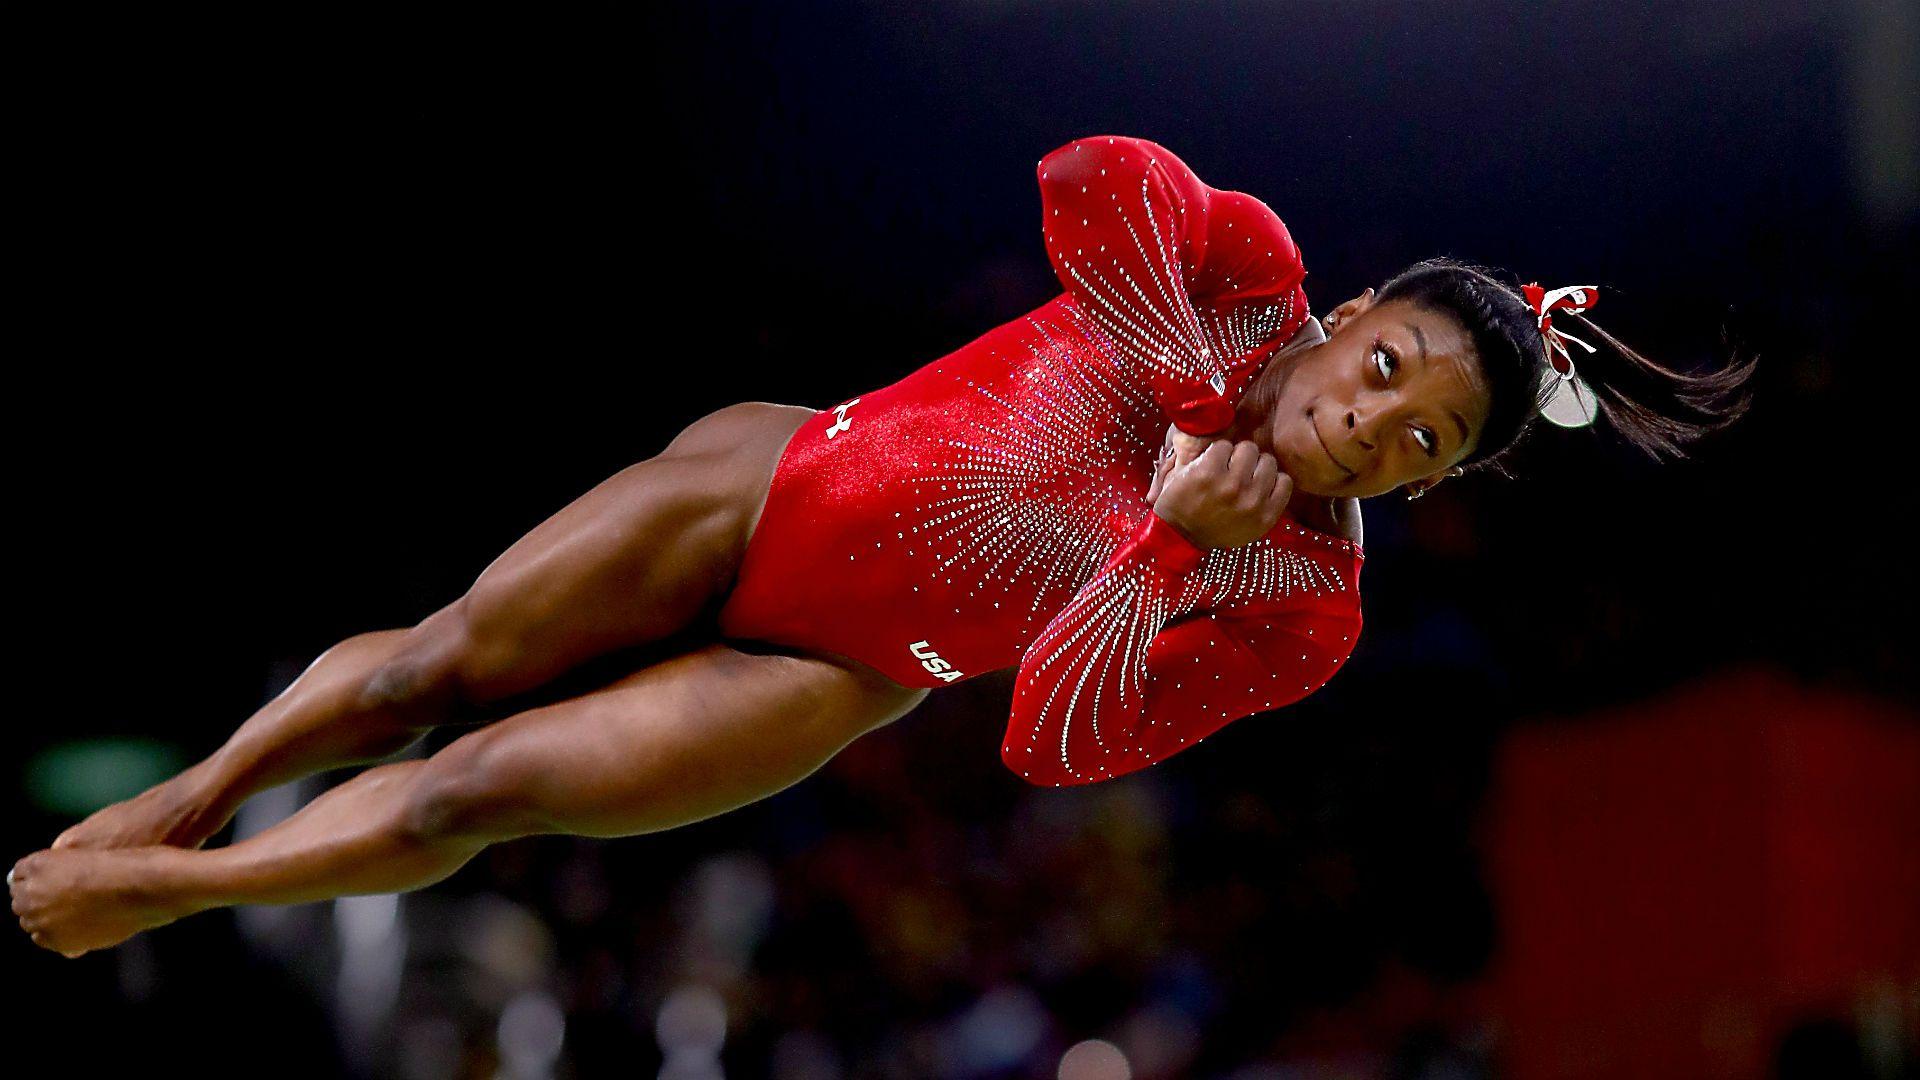 Rio Olympics 2016: Simone Biles wins gold medal in the vault